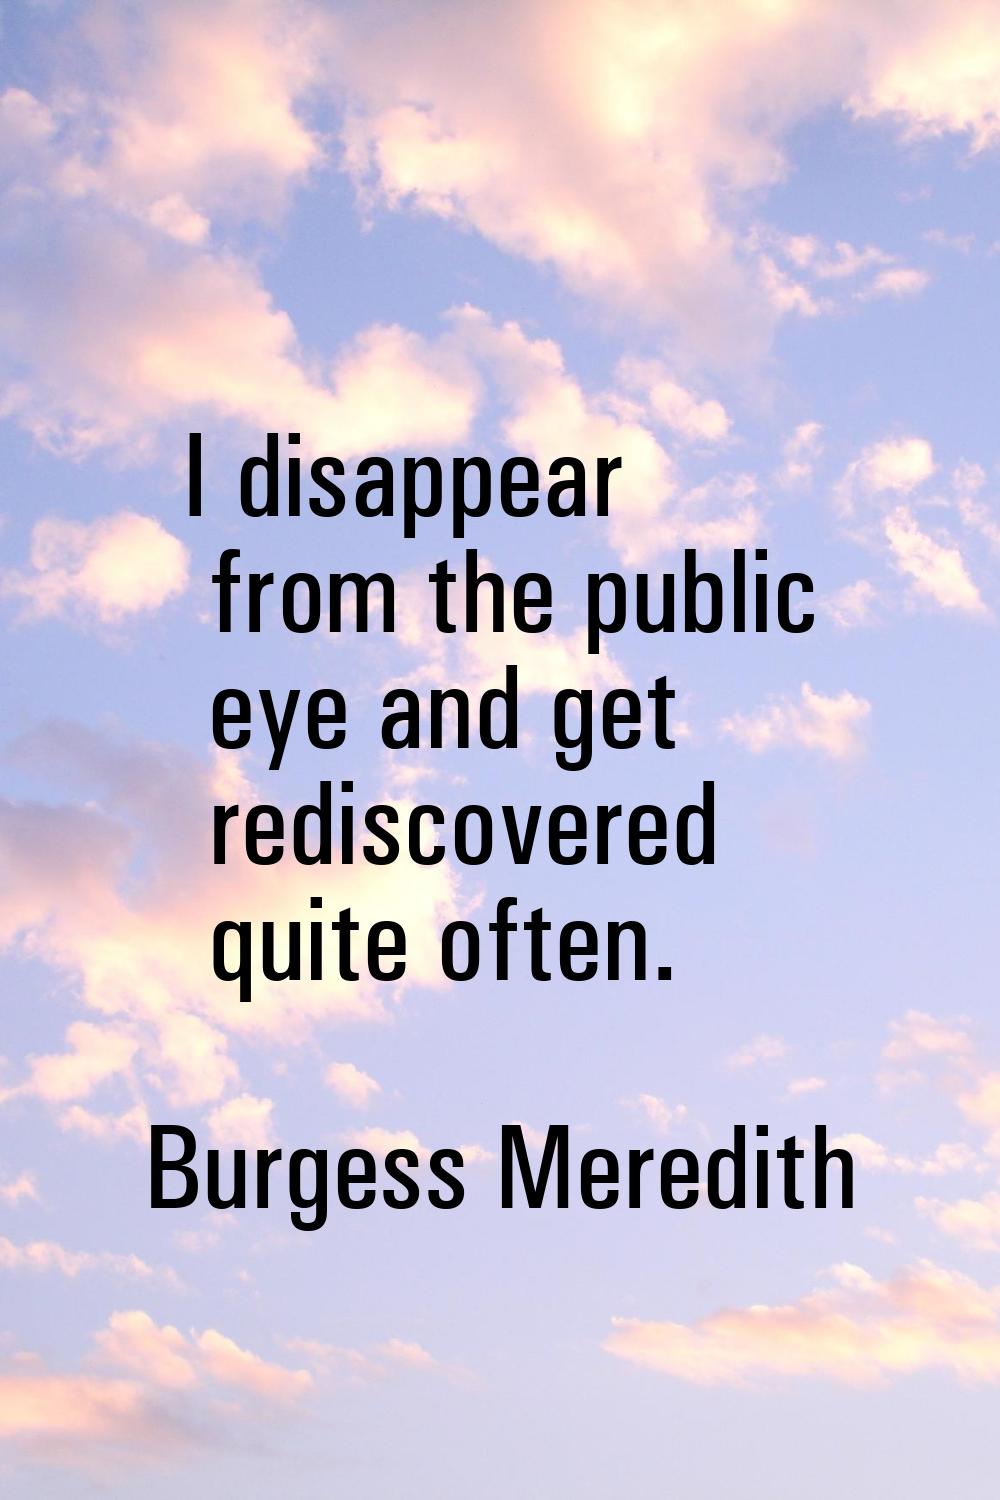 I disappear from the public eye and get rediscovered quite often.